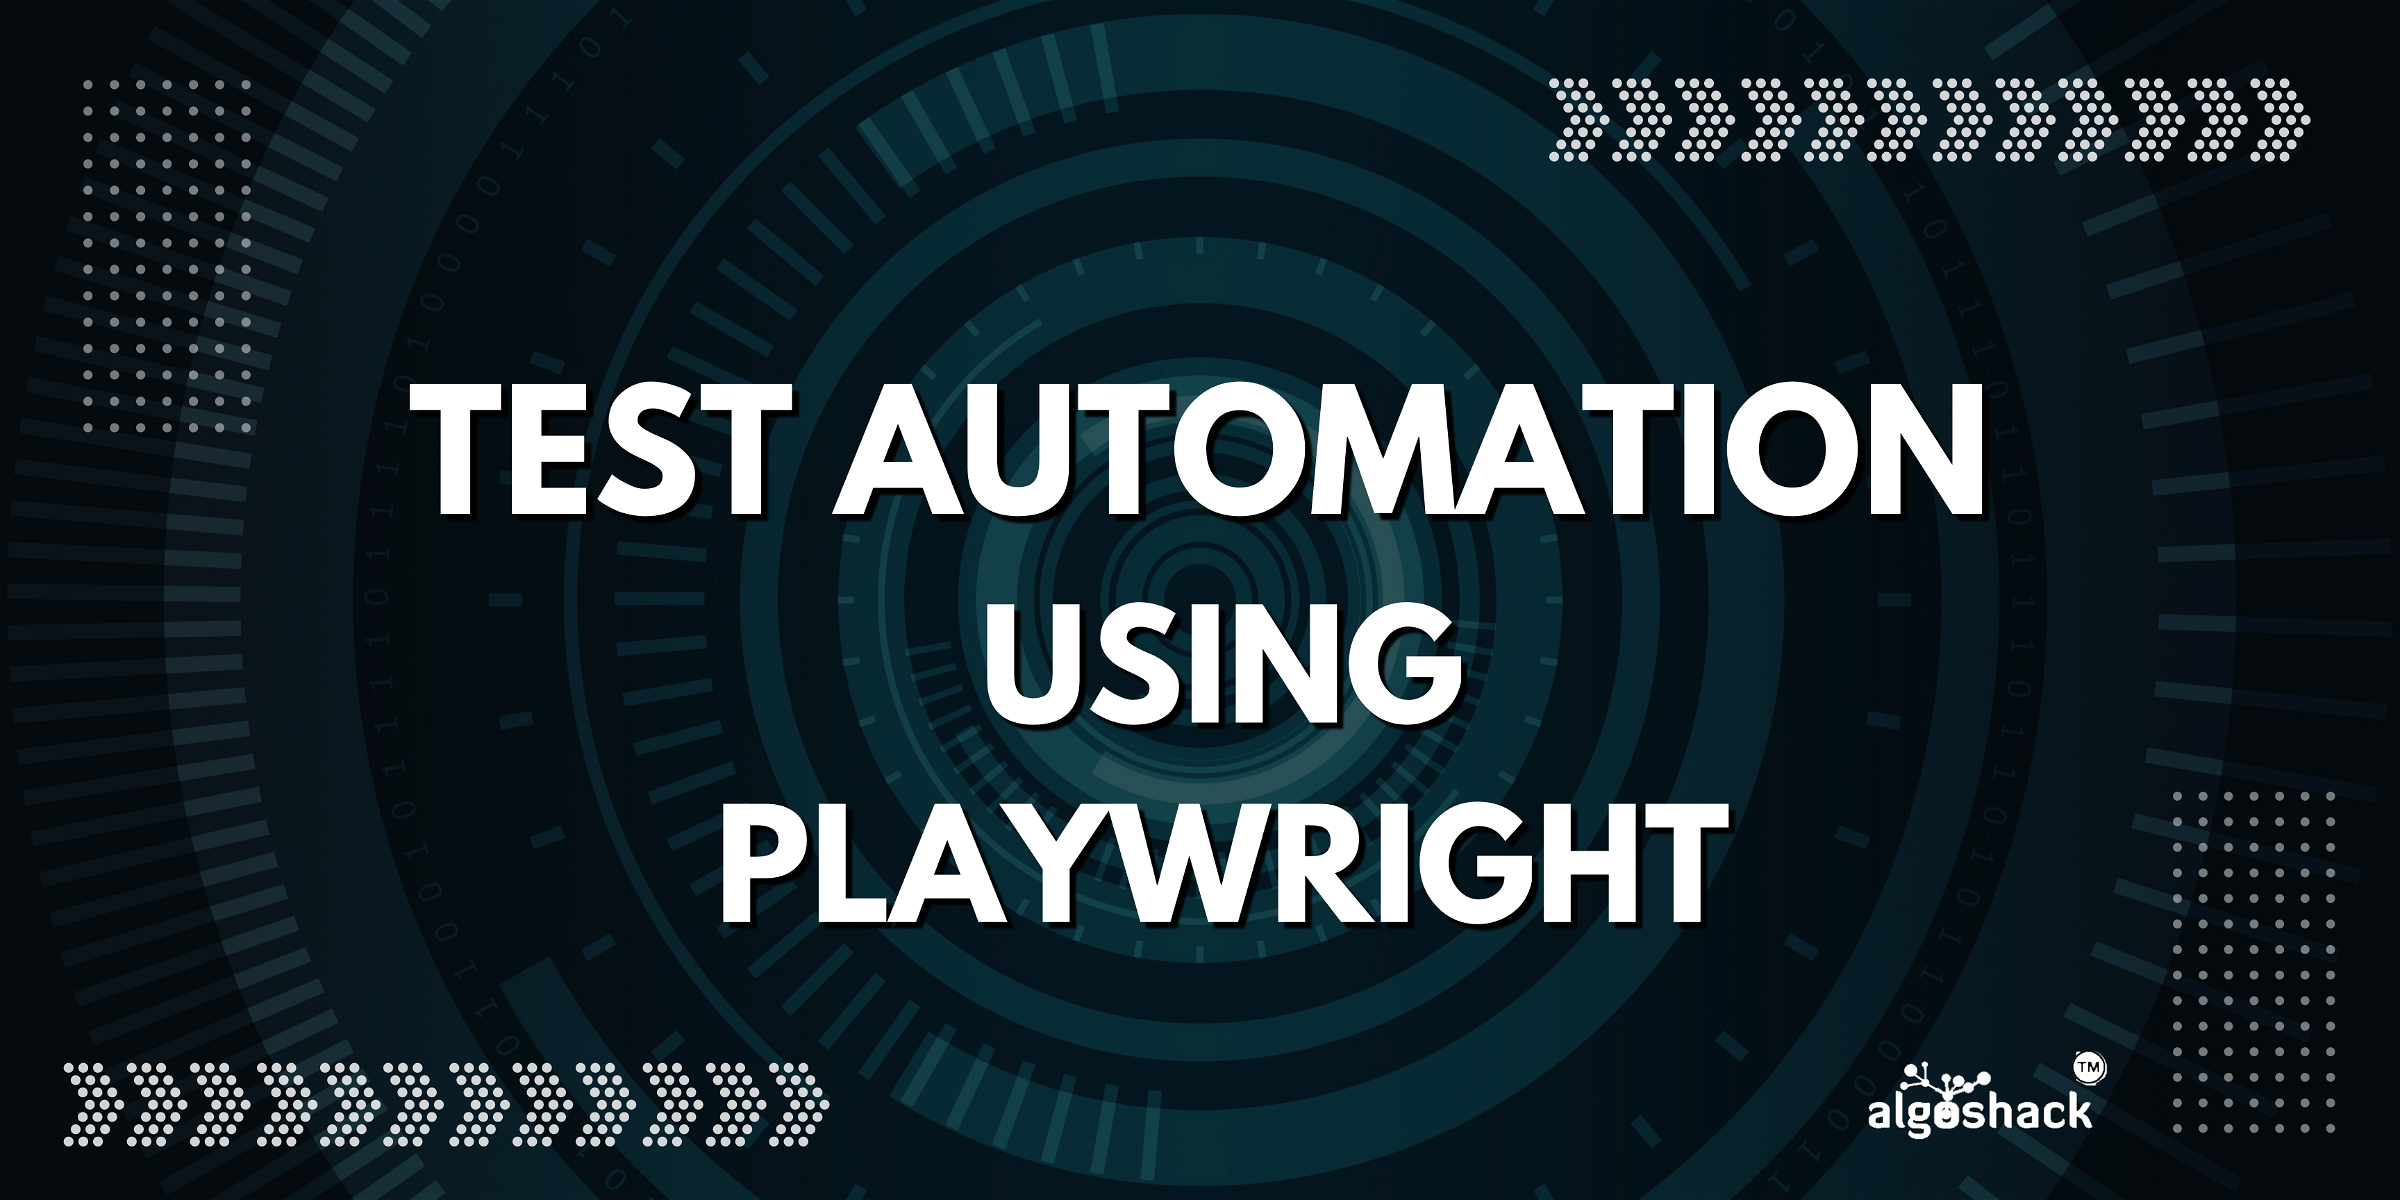 Test Automation using Playwright